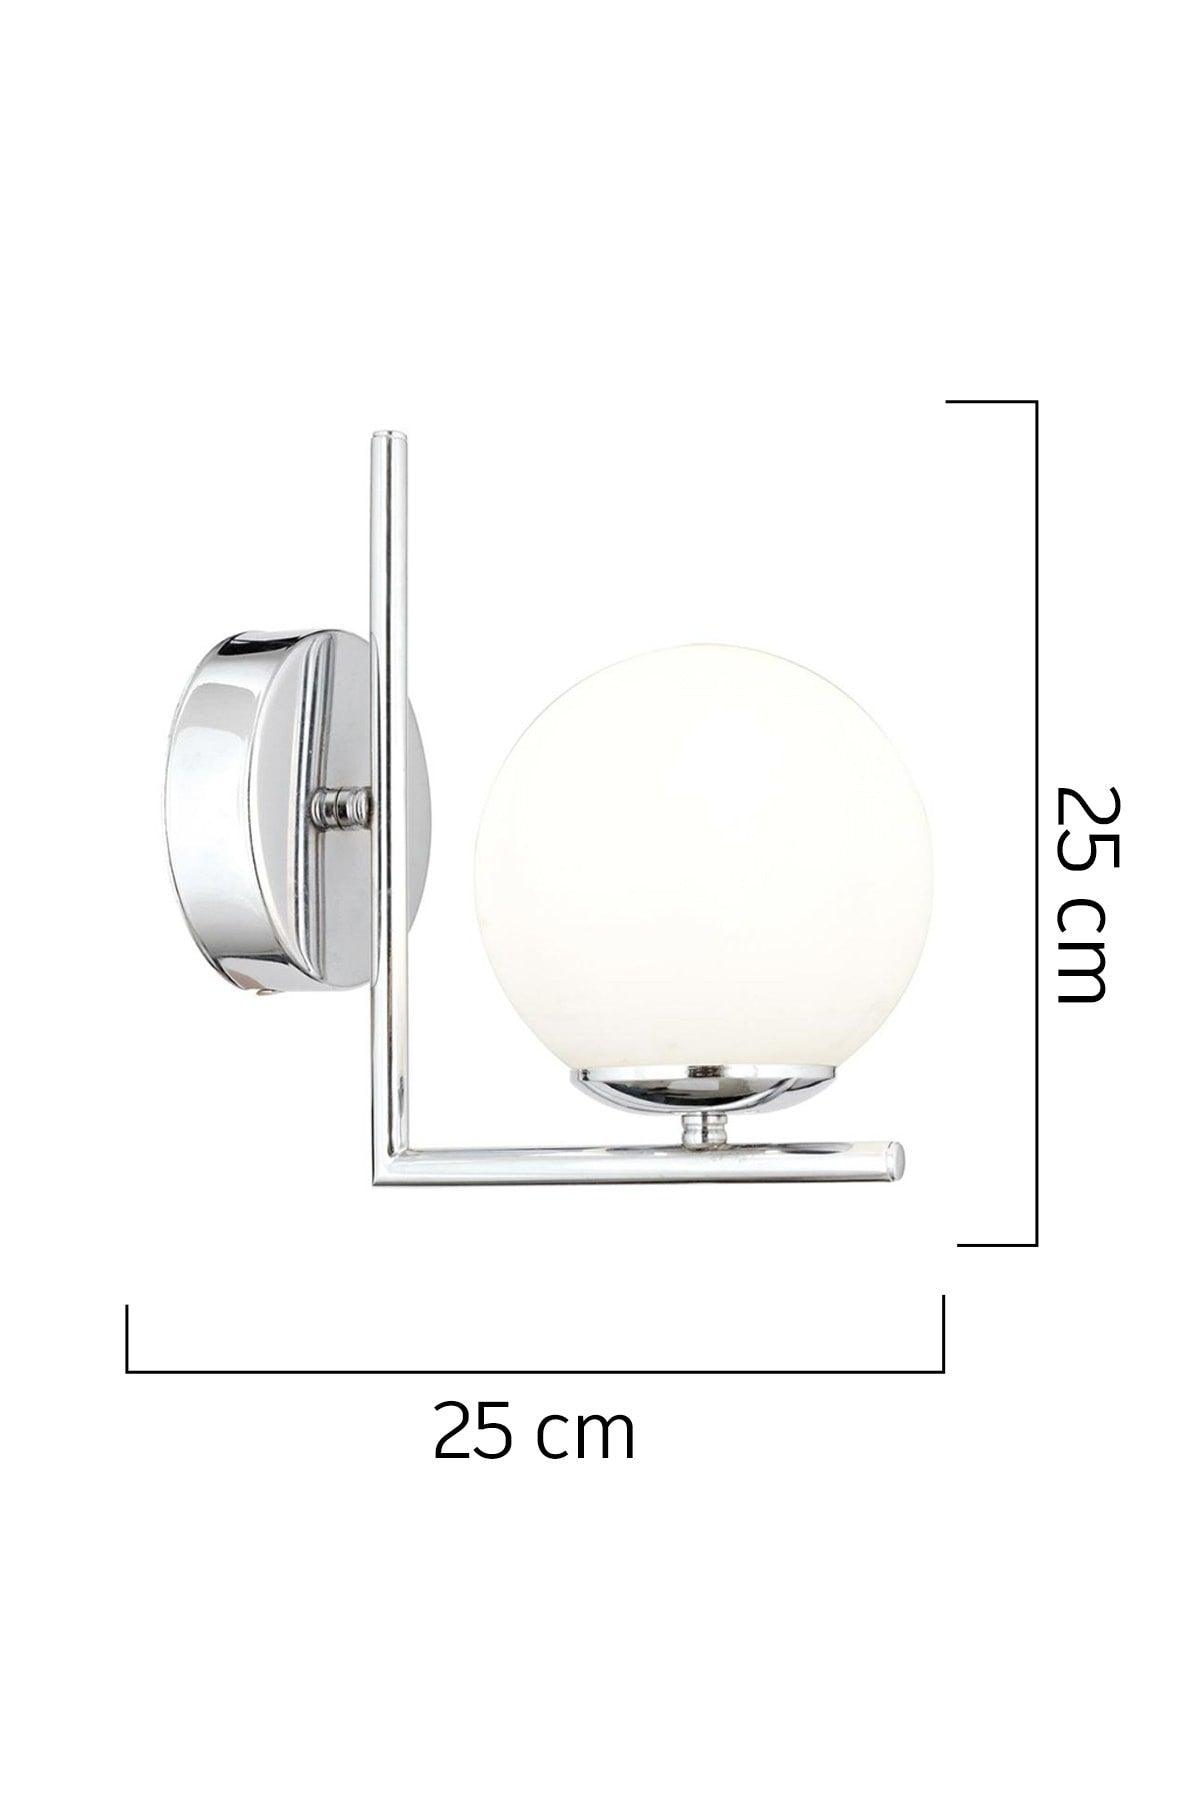 Sara Chrome Plated Wall Lamp Set of 2 Wall Sconces Modern Wall Sconce For Bedroom-Bedhead-Bathroom - Swordslife